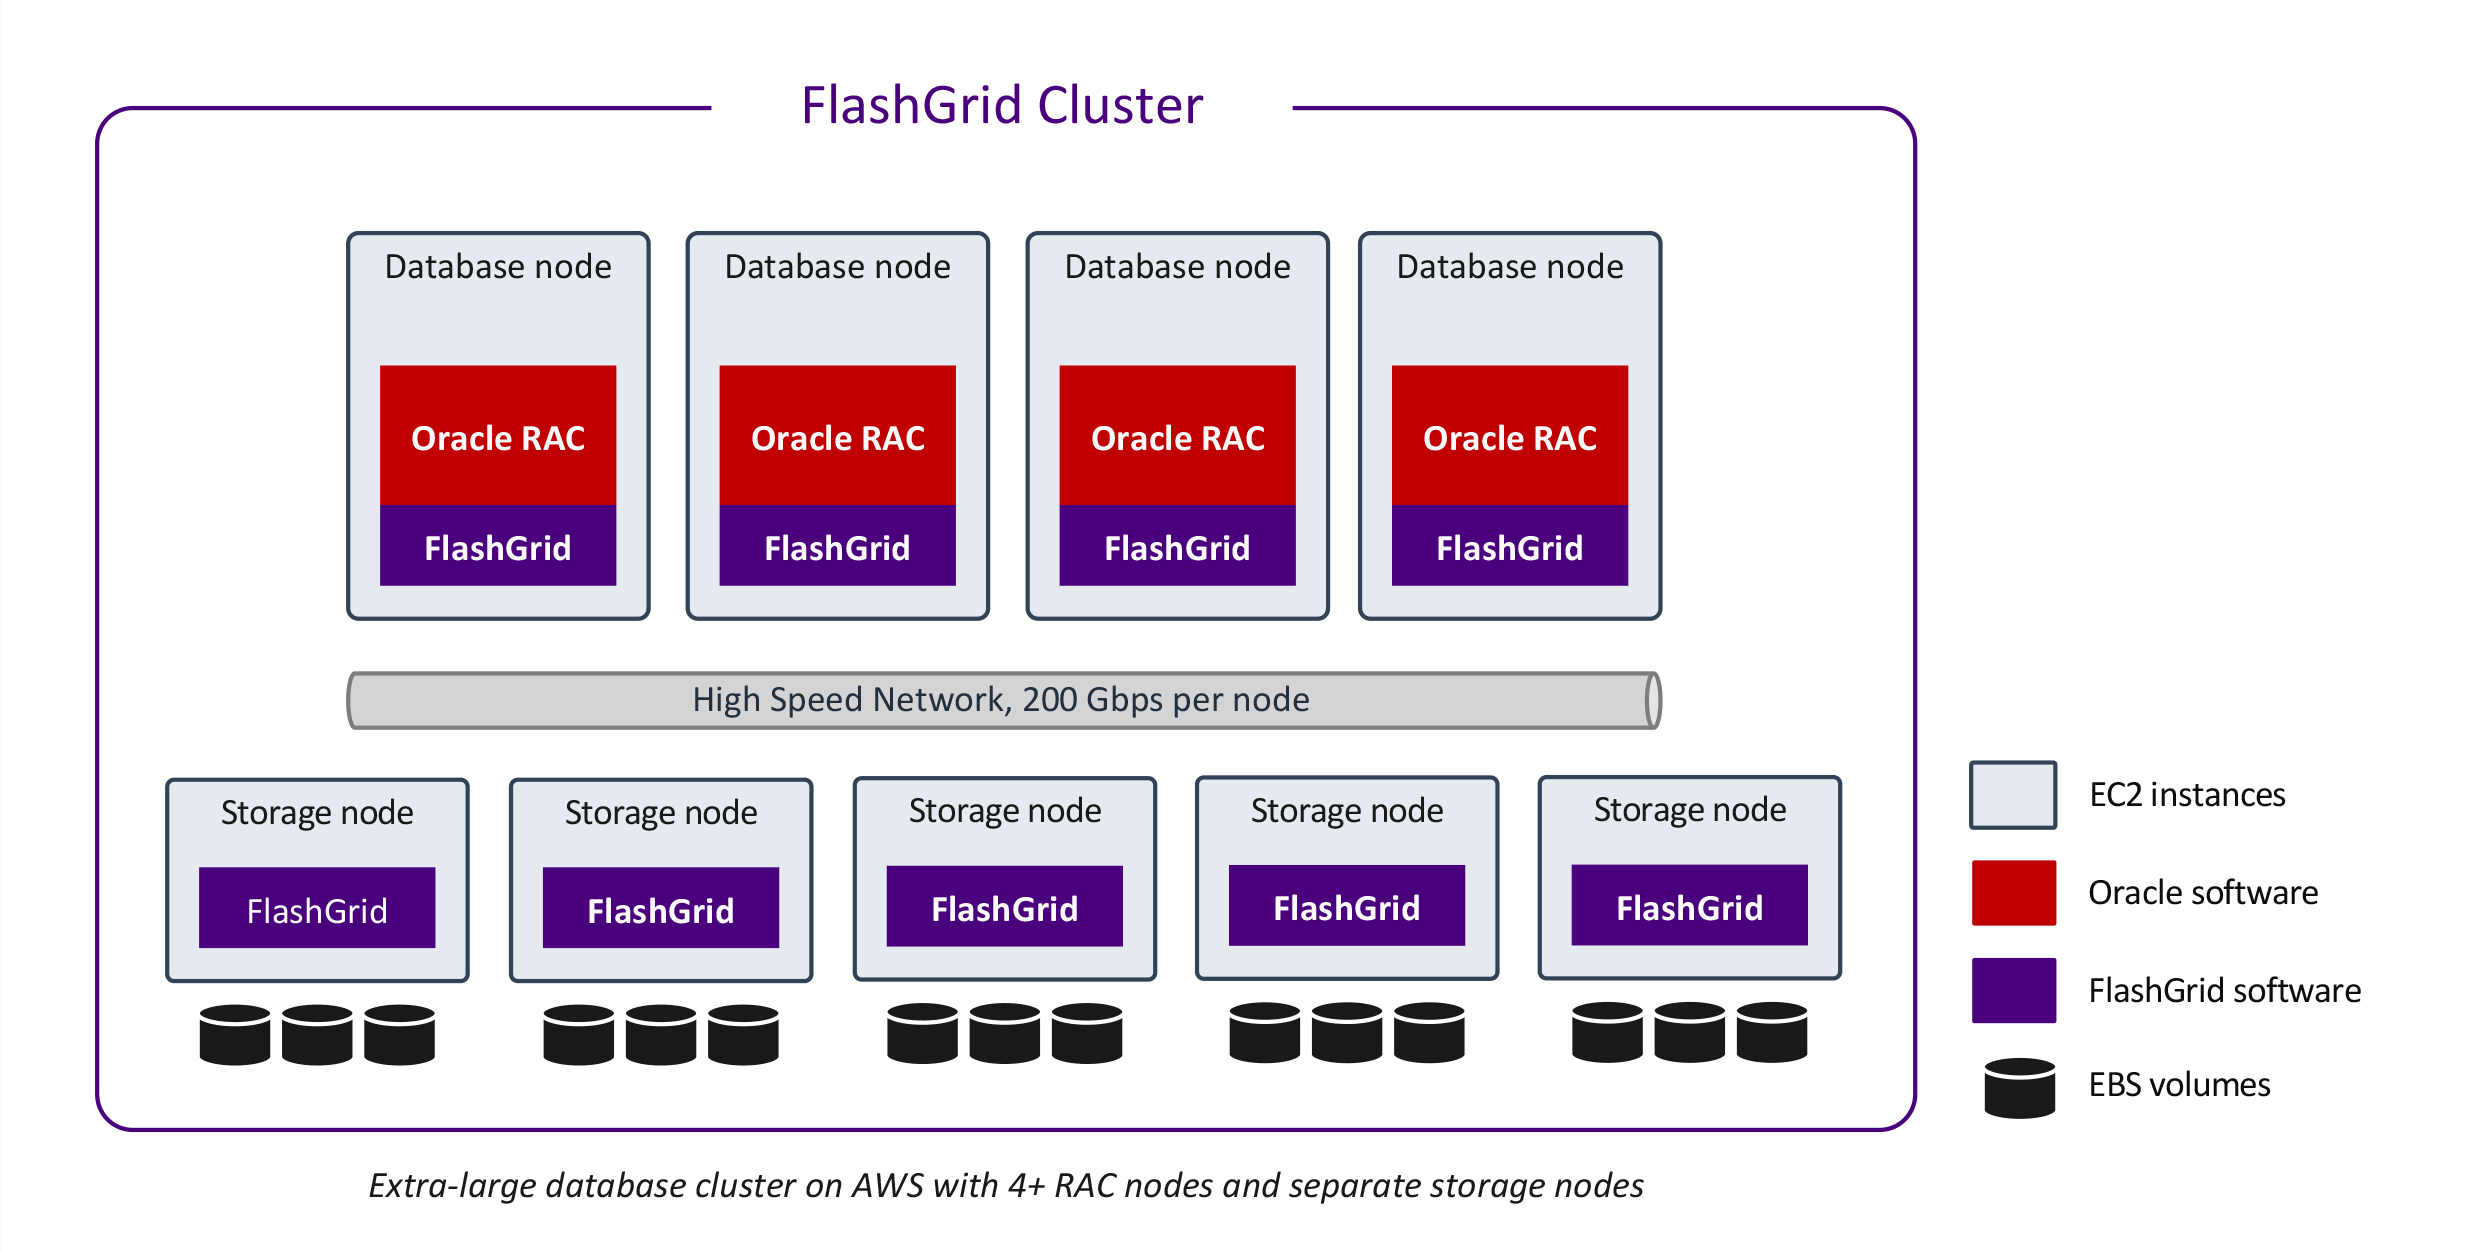 FlashGrid Cluster for Oracle RAC on AWS - Extra Large Databases